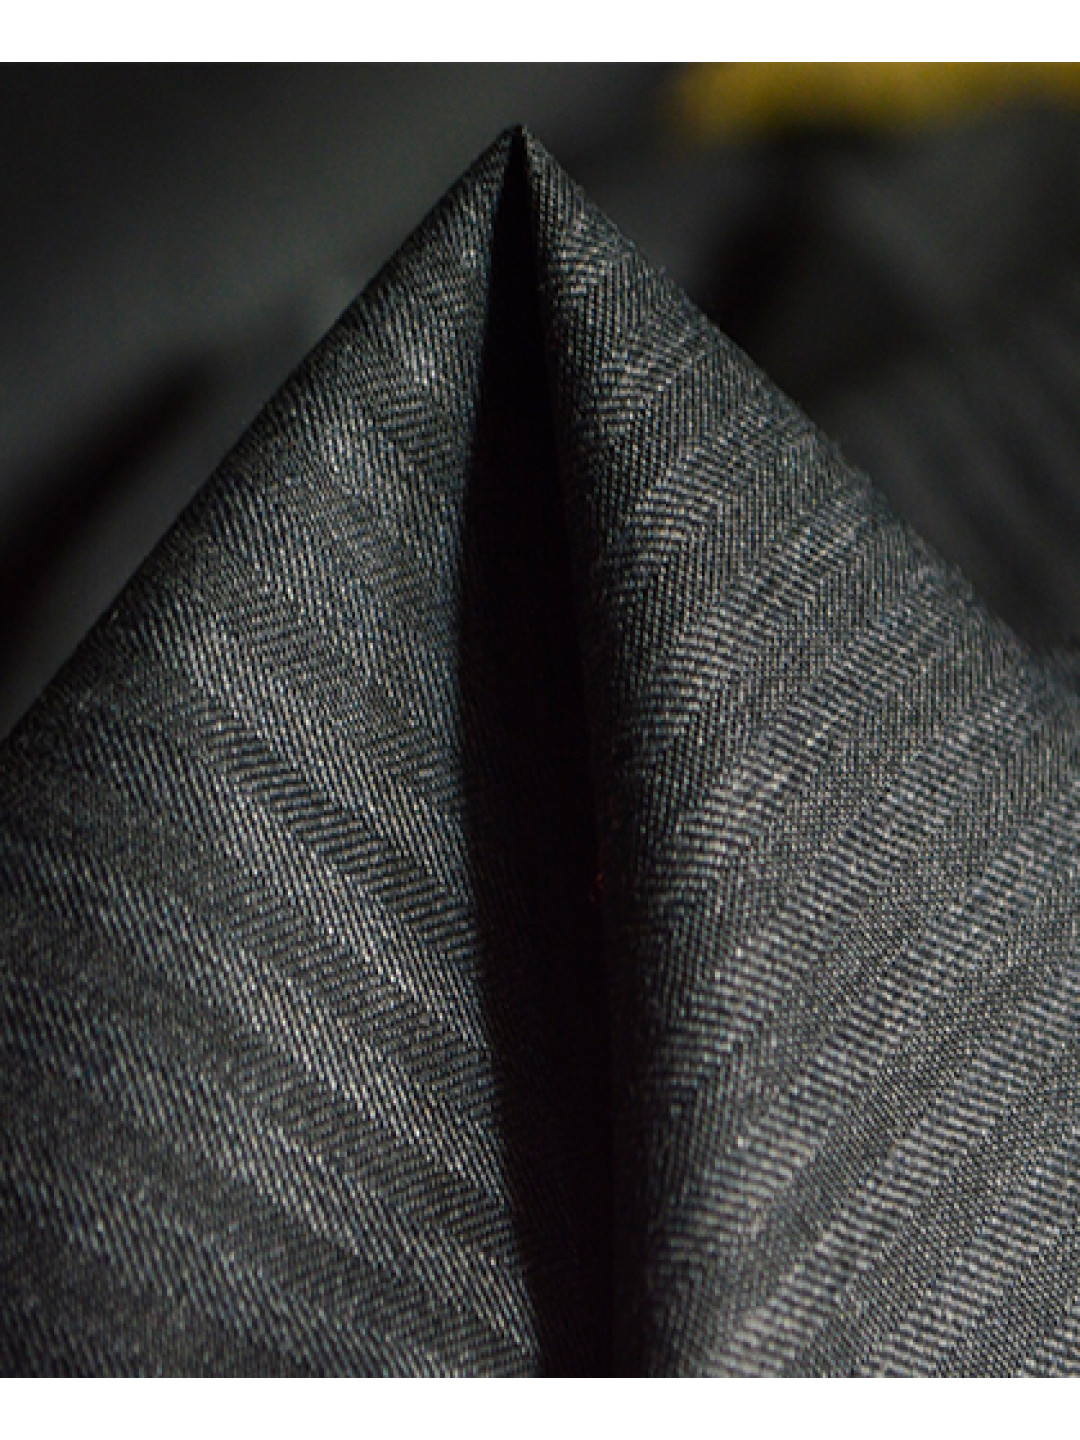 NEW GREY WOOL WITH STRIPES 